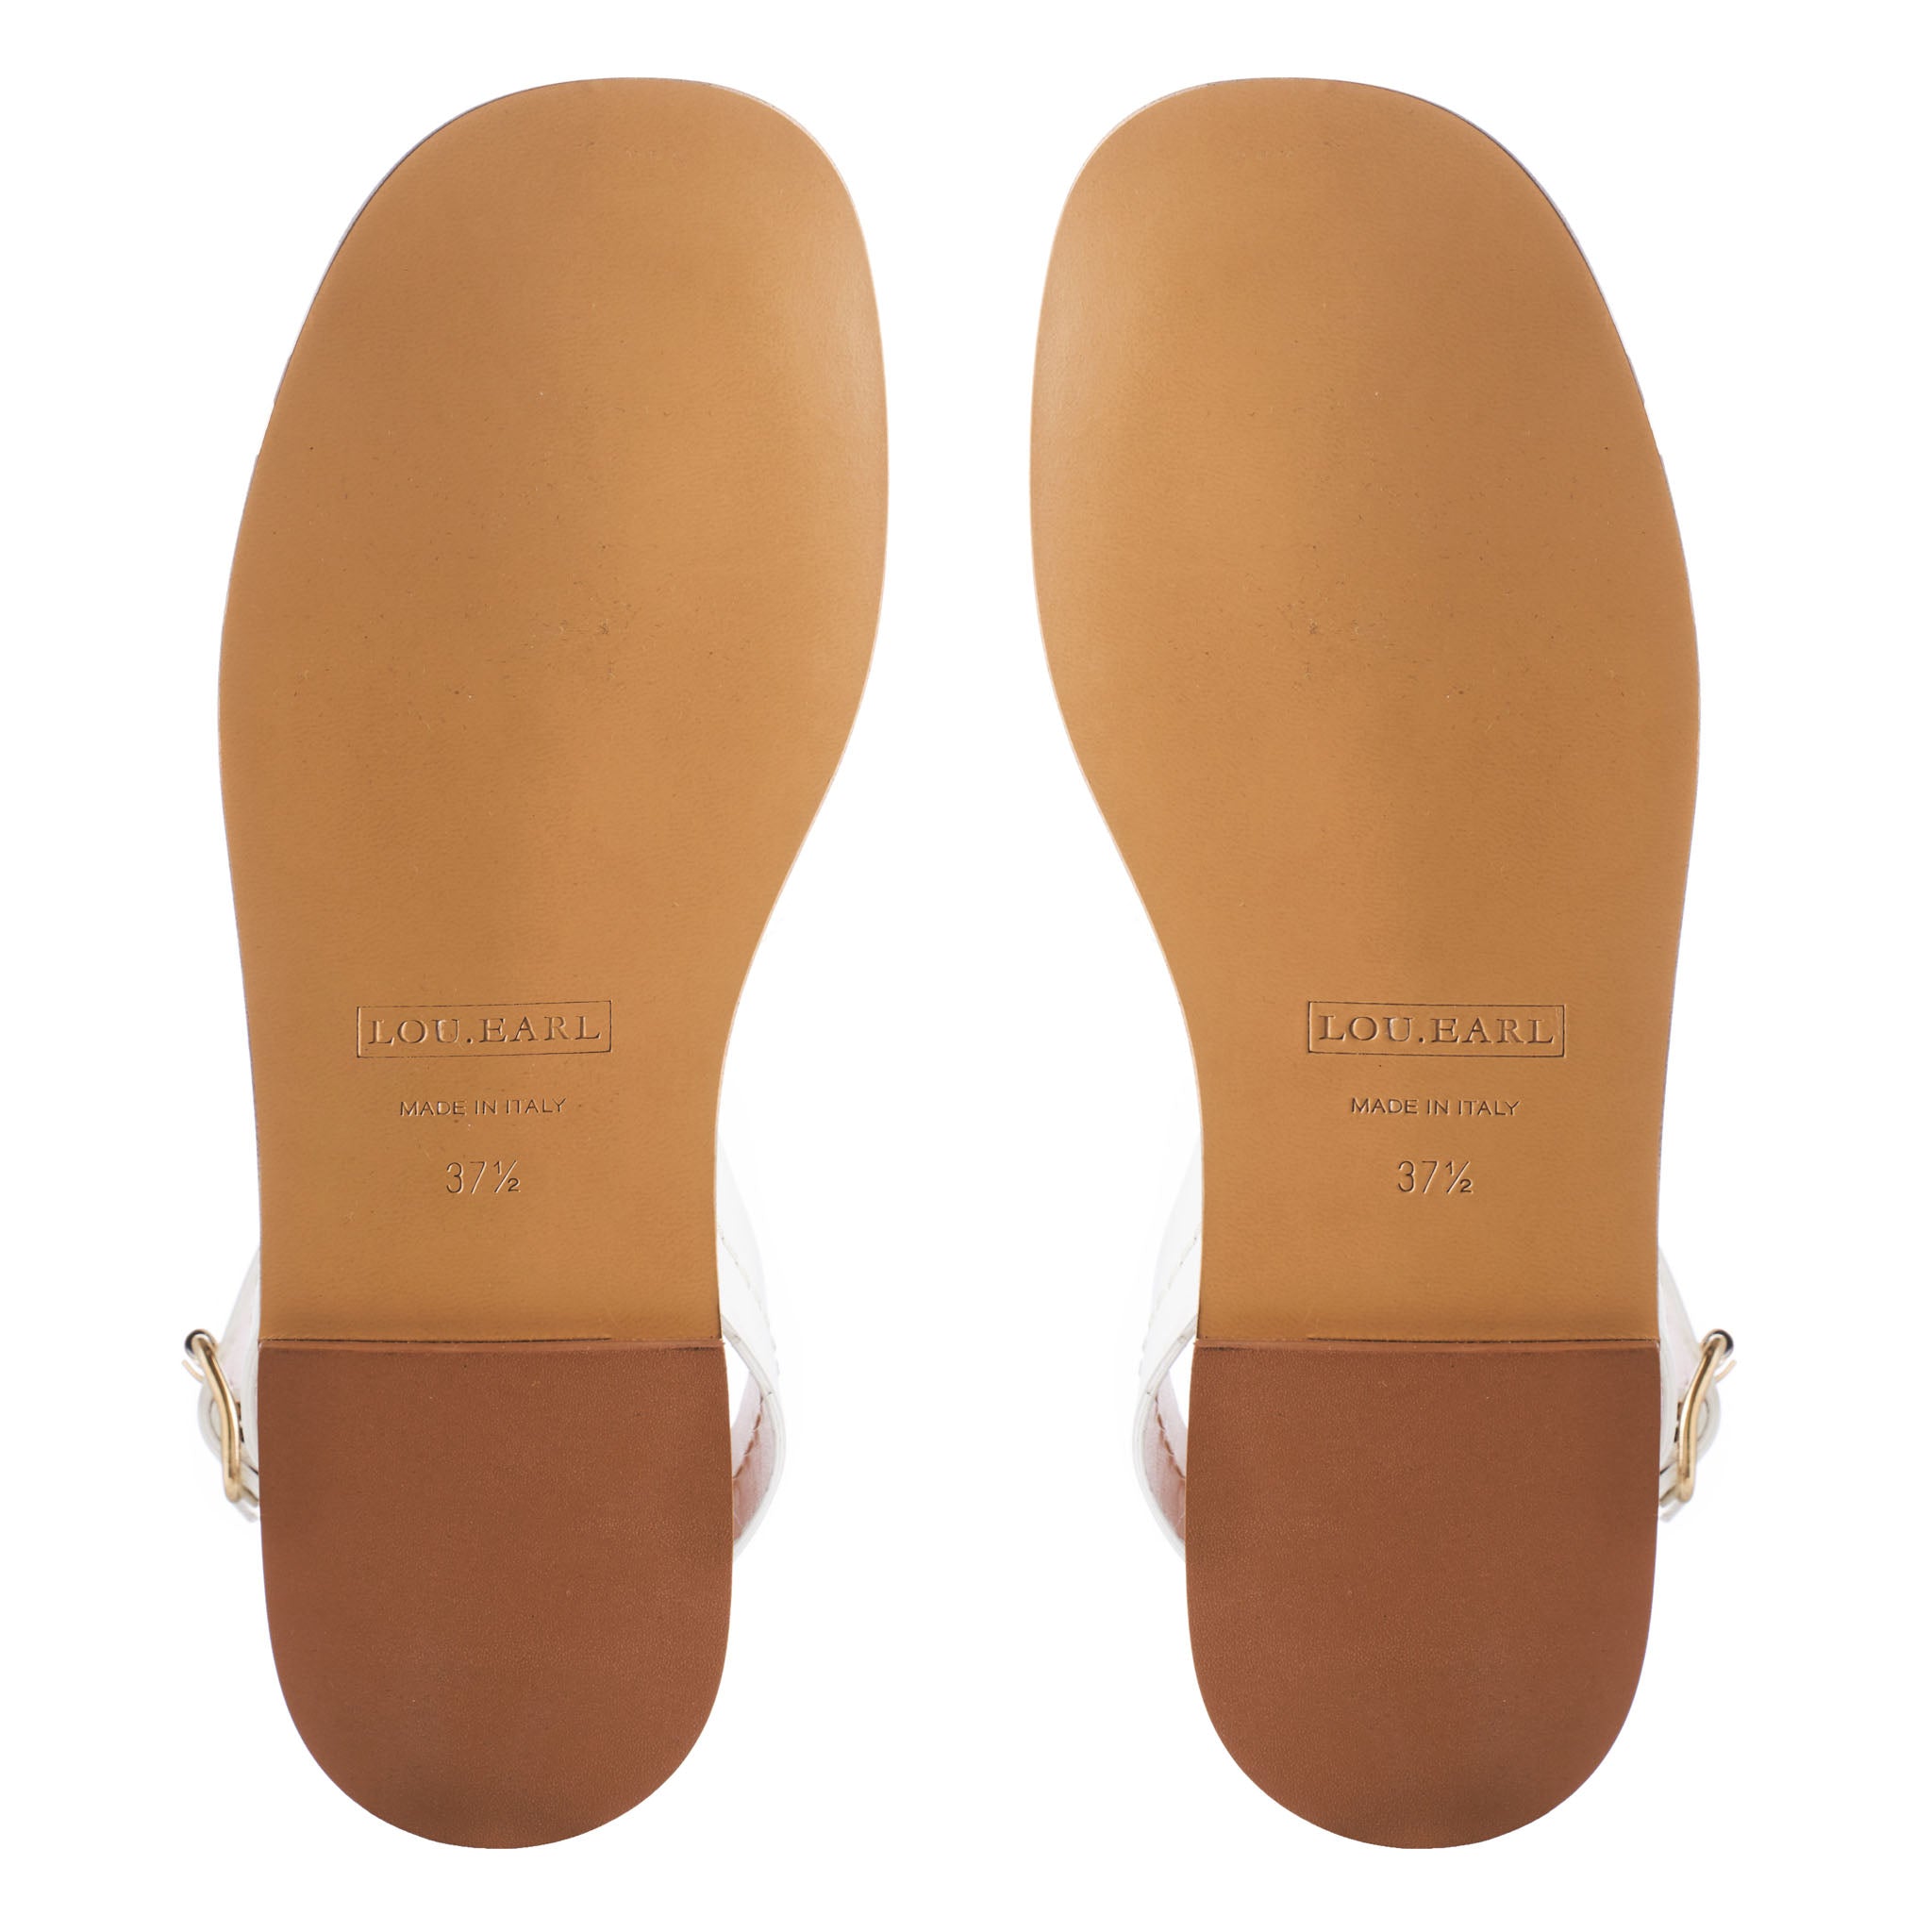 outer view of leather sandals sole, shape is lightly rounded toe with wide sole shape